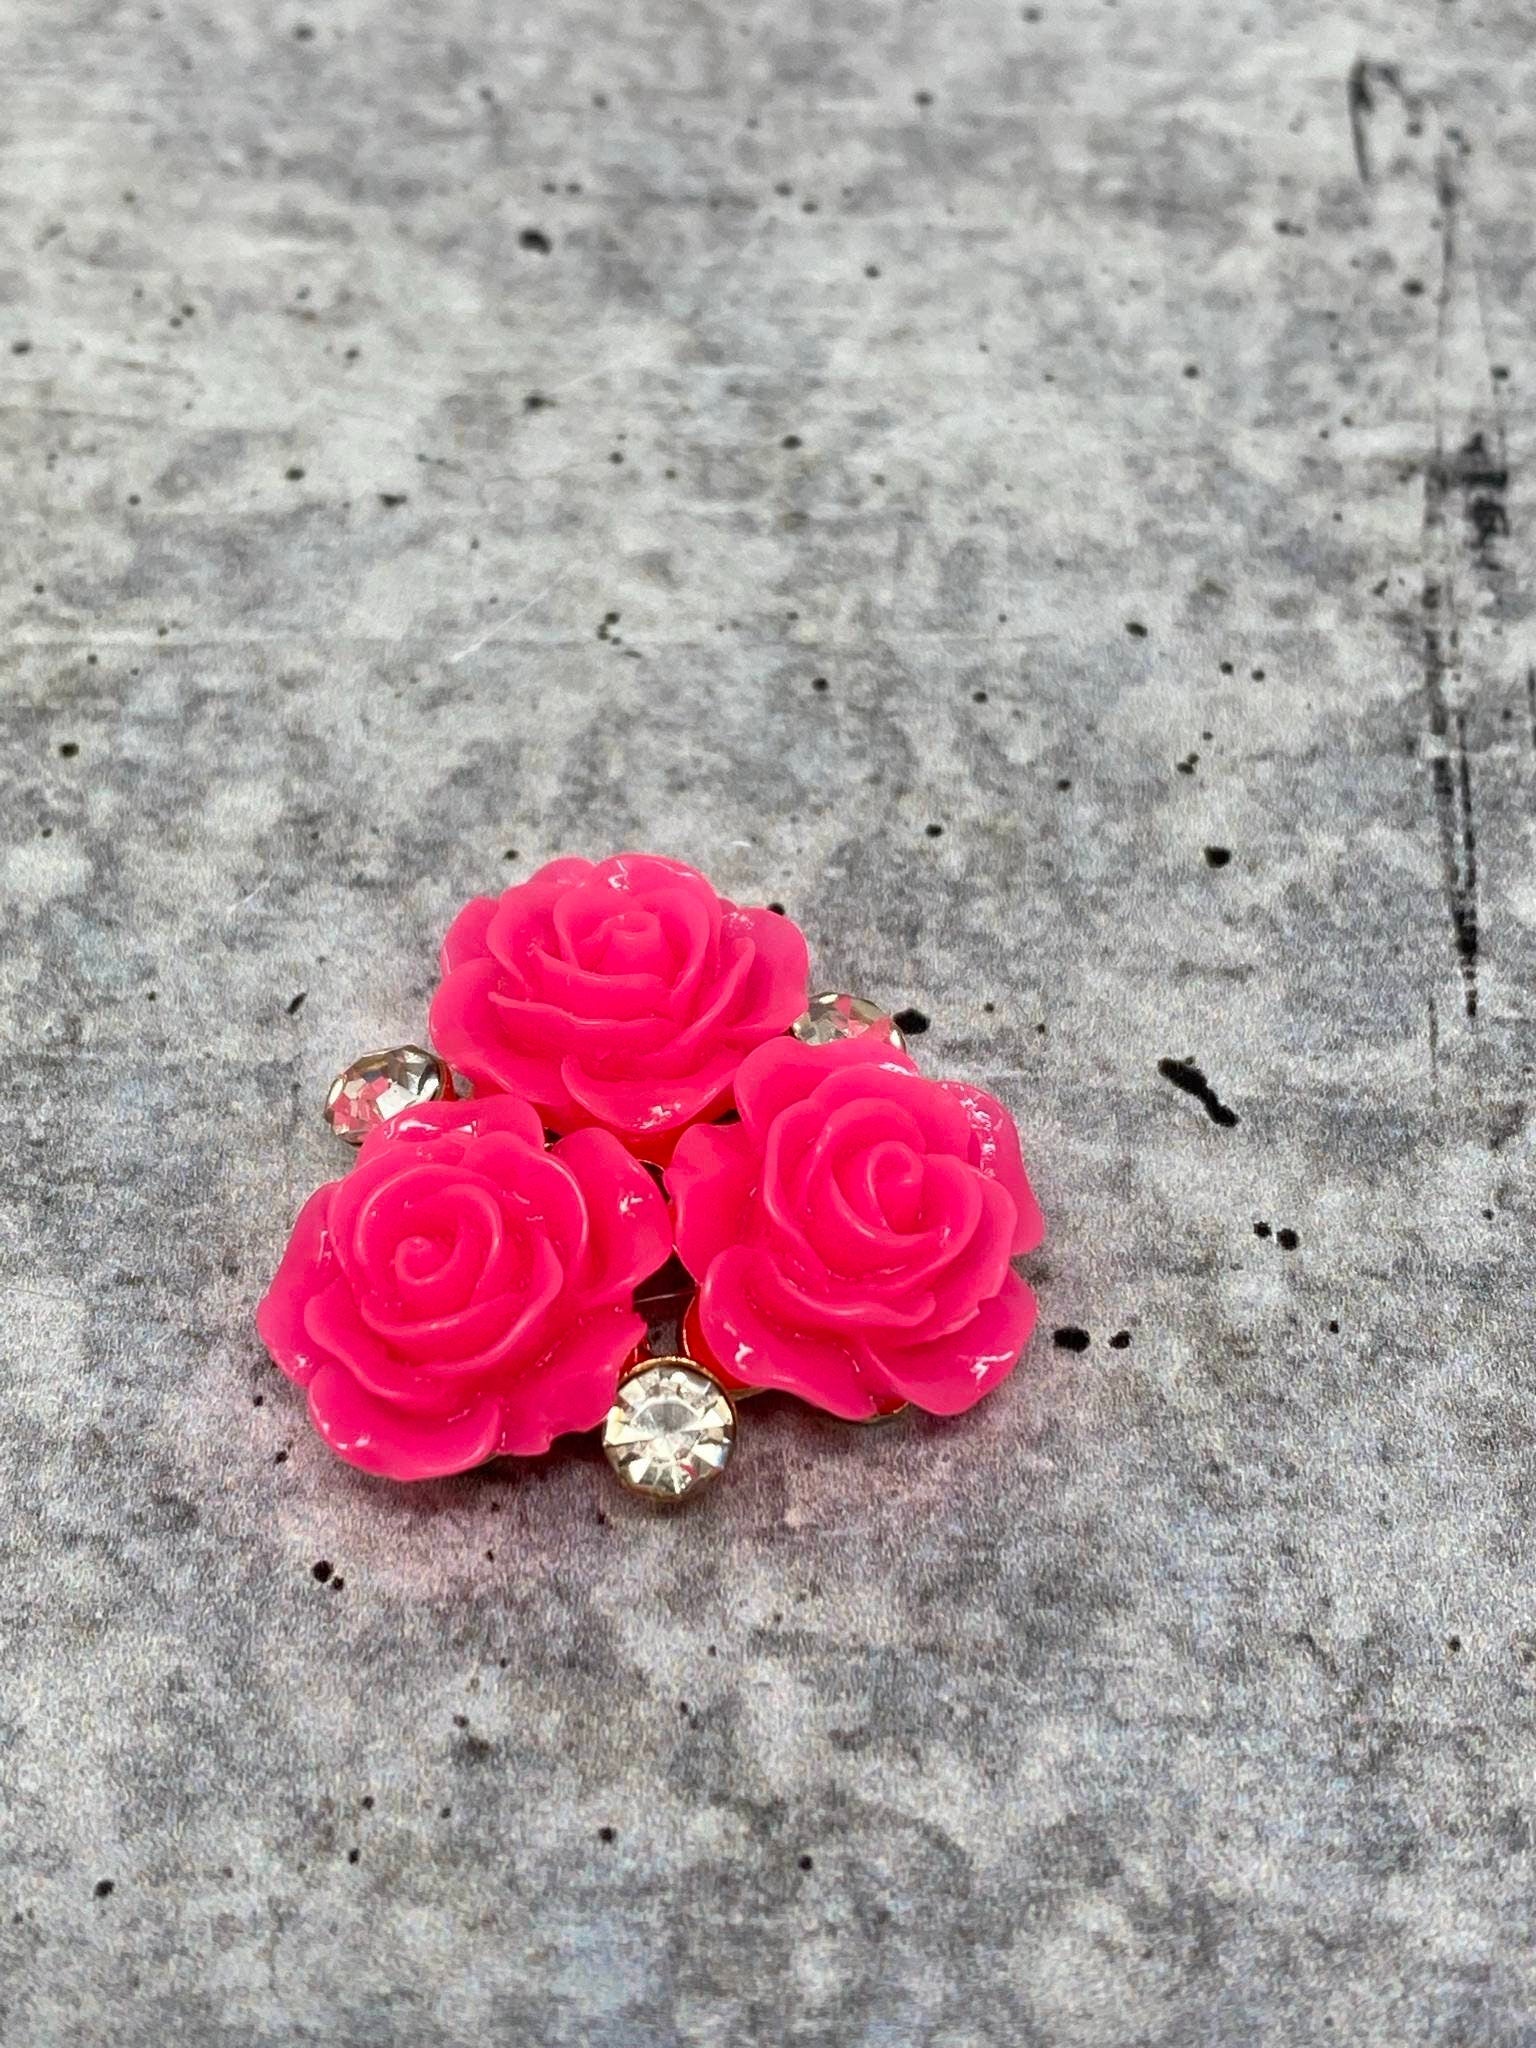 New, HOT Pink Resin Triple "Open Rose Bud" w/Bling, Flatback Charm, 1-pc Charm for CR O CS, Phone Cases, Sunglasses, Decor, & More! Size 2"